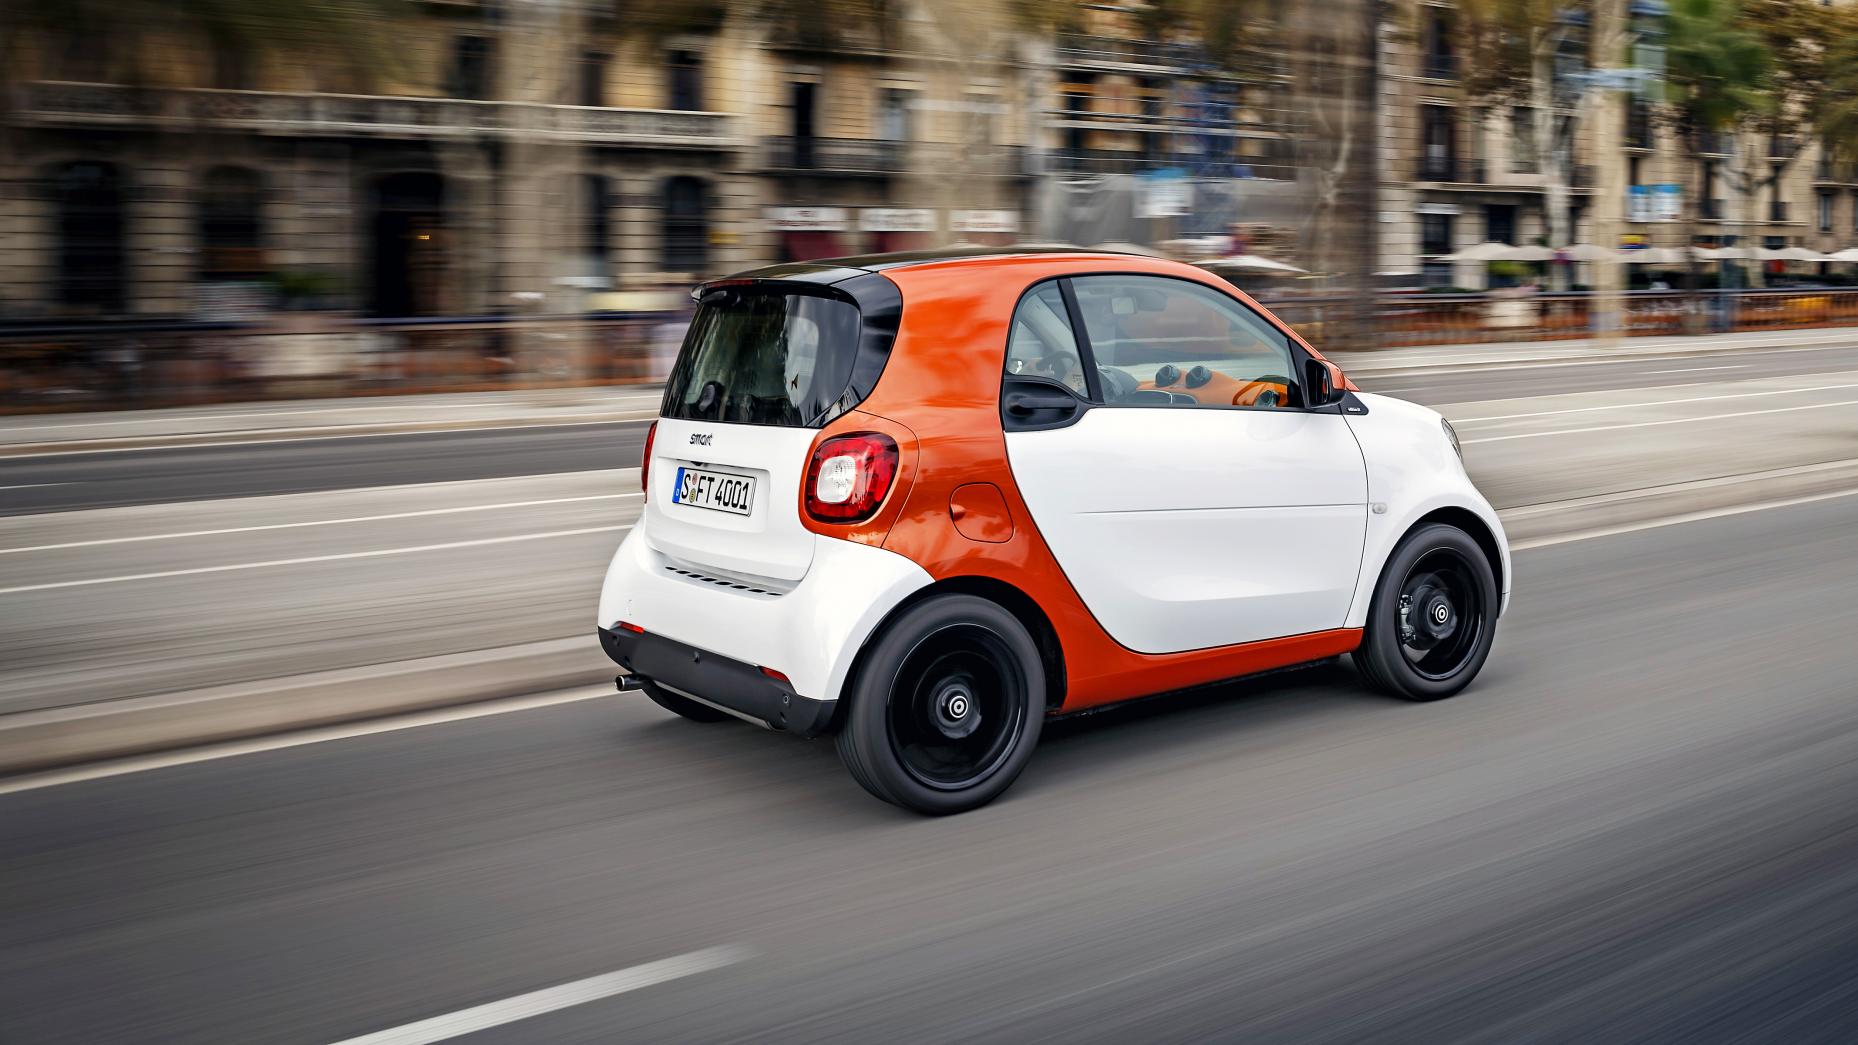 2. Smart ForTwo